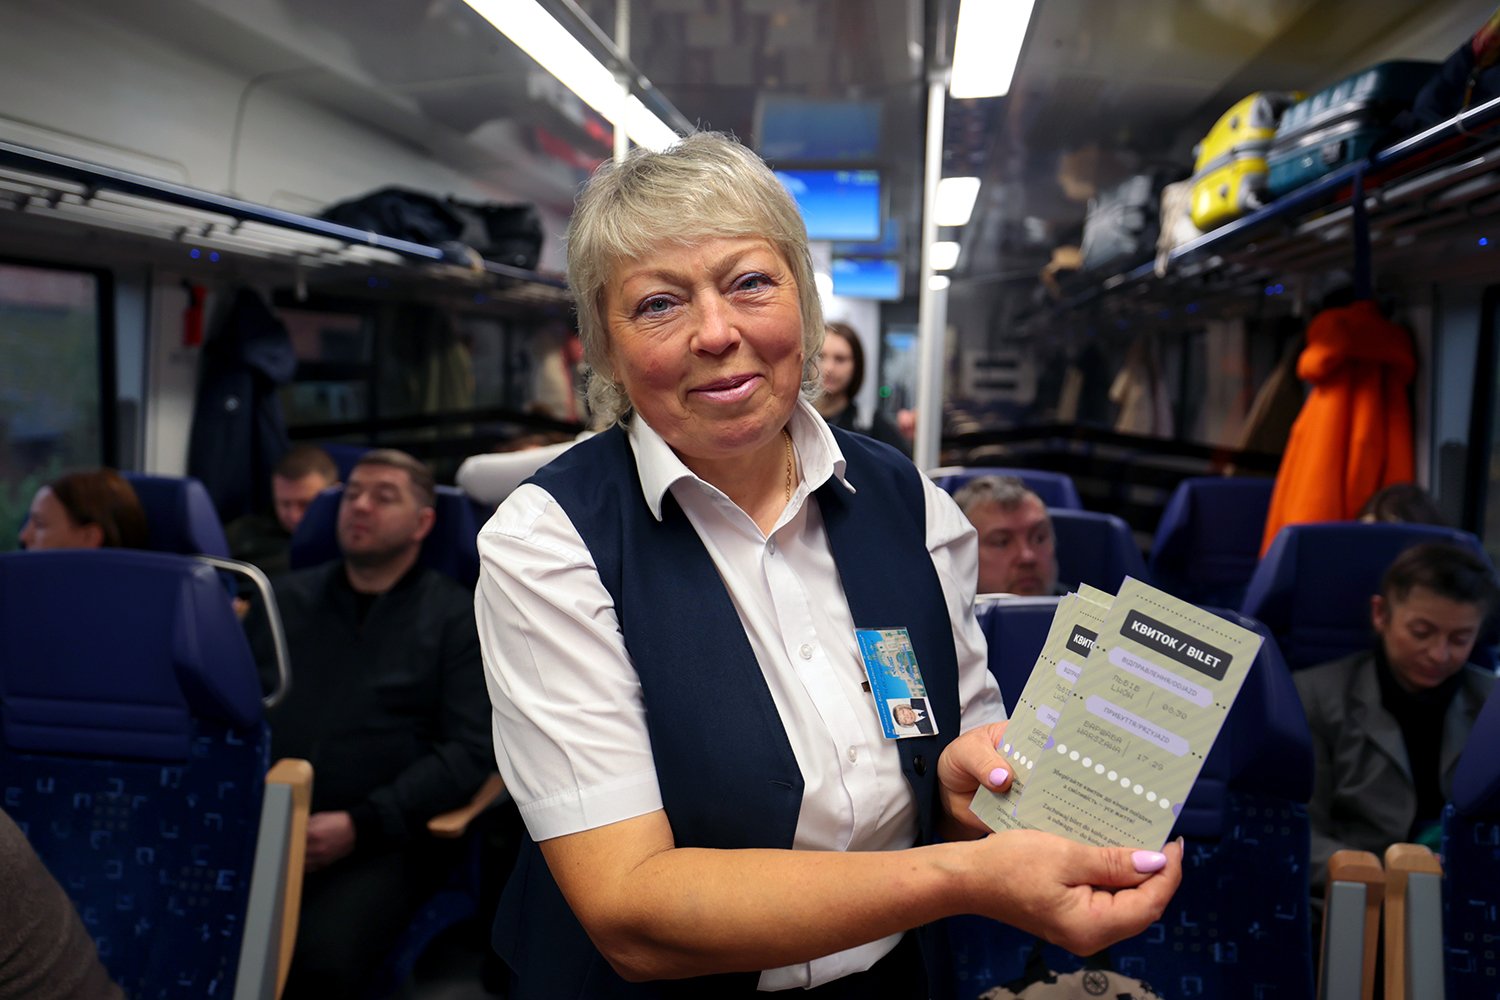 A smiling train guard wearing a blue vest and a white collared shirt displays souvenir tickets on a crowded train, commemoratingthe launch of the international route connecting Lviv and Warsaw.